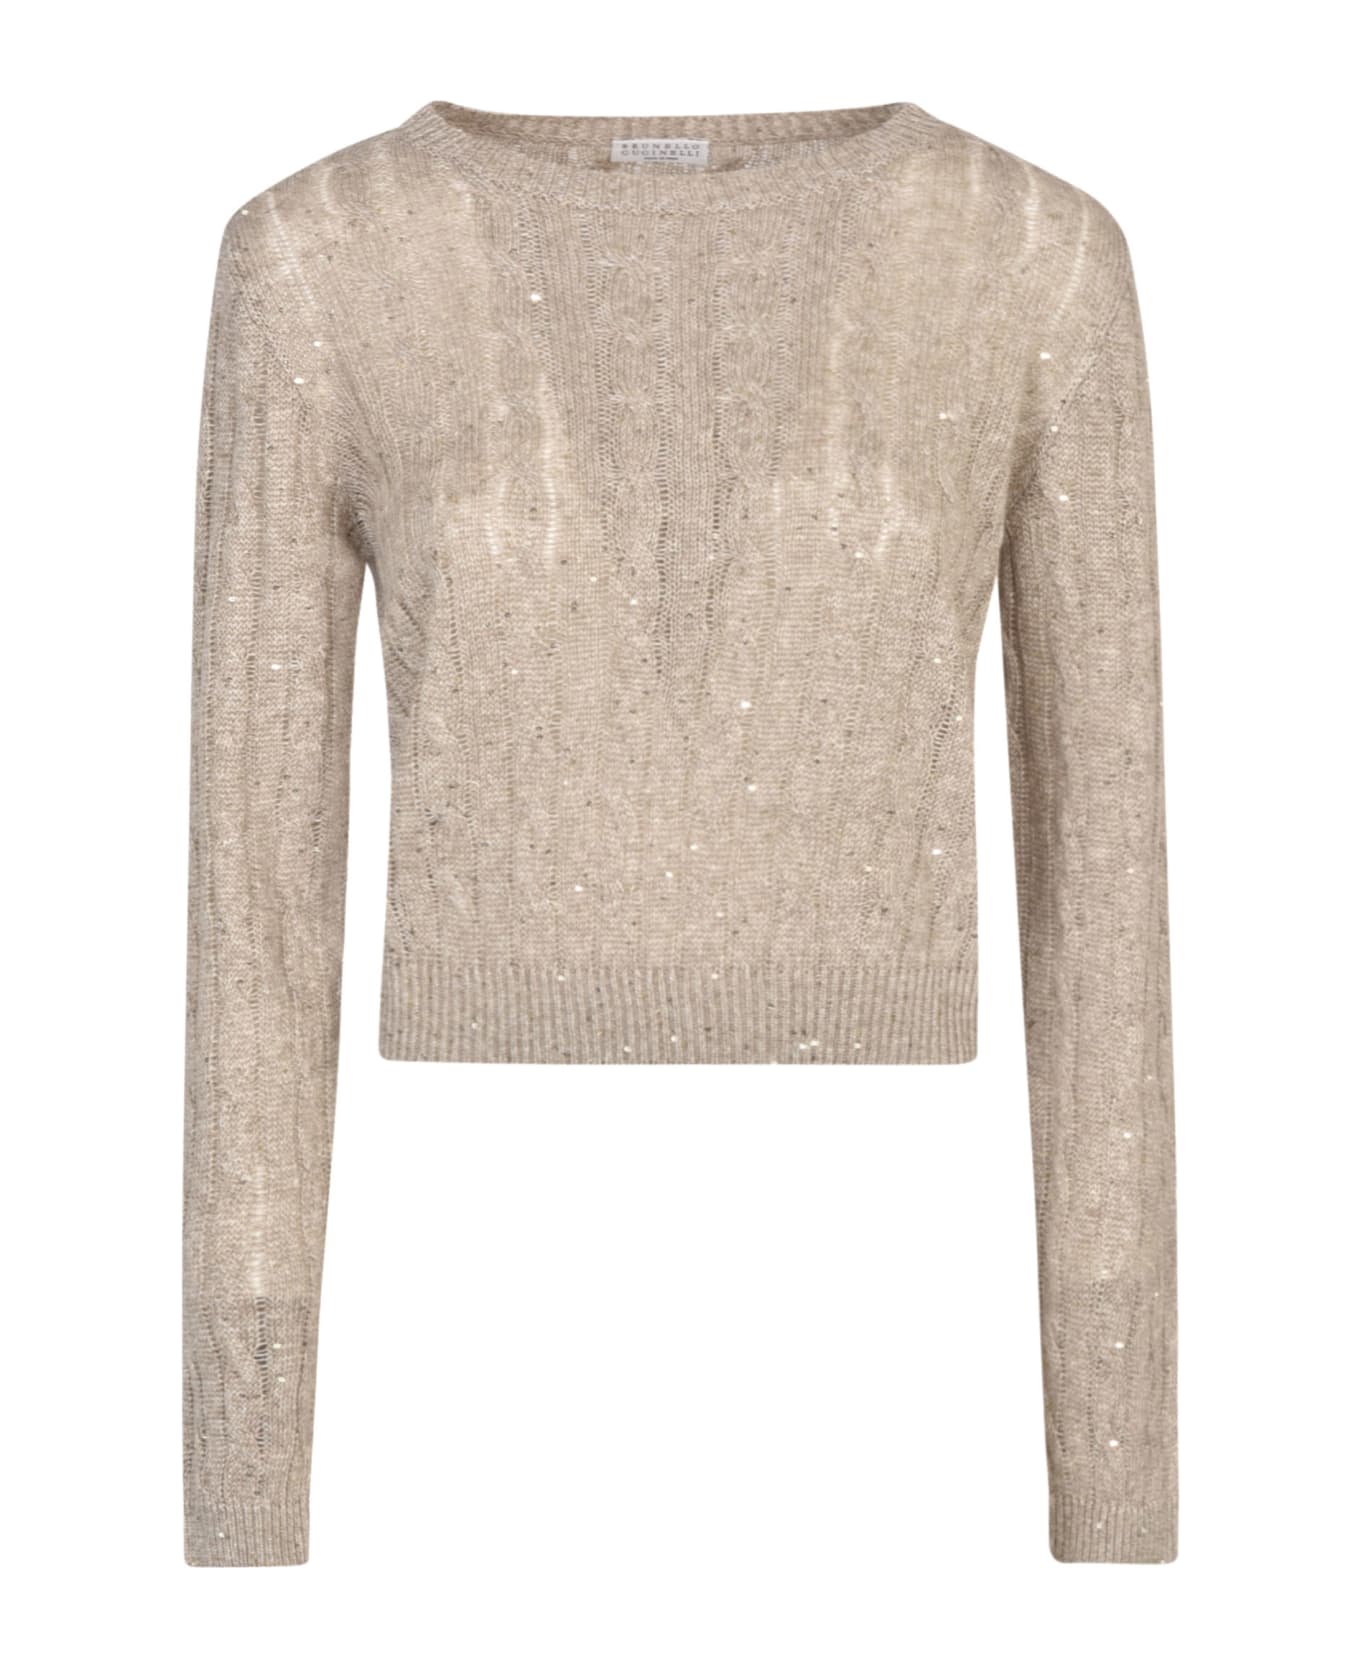 Brunello Cucinelli Micro Sequins Embellished Cable Knit Sweater - Beige